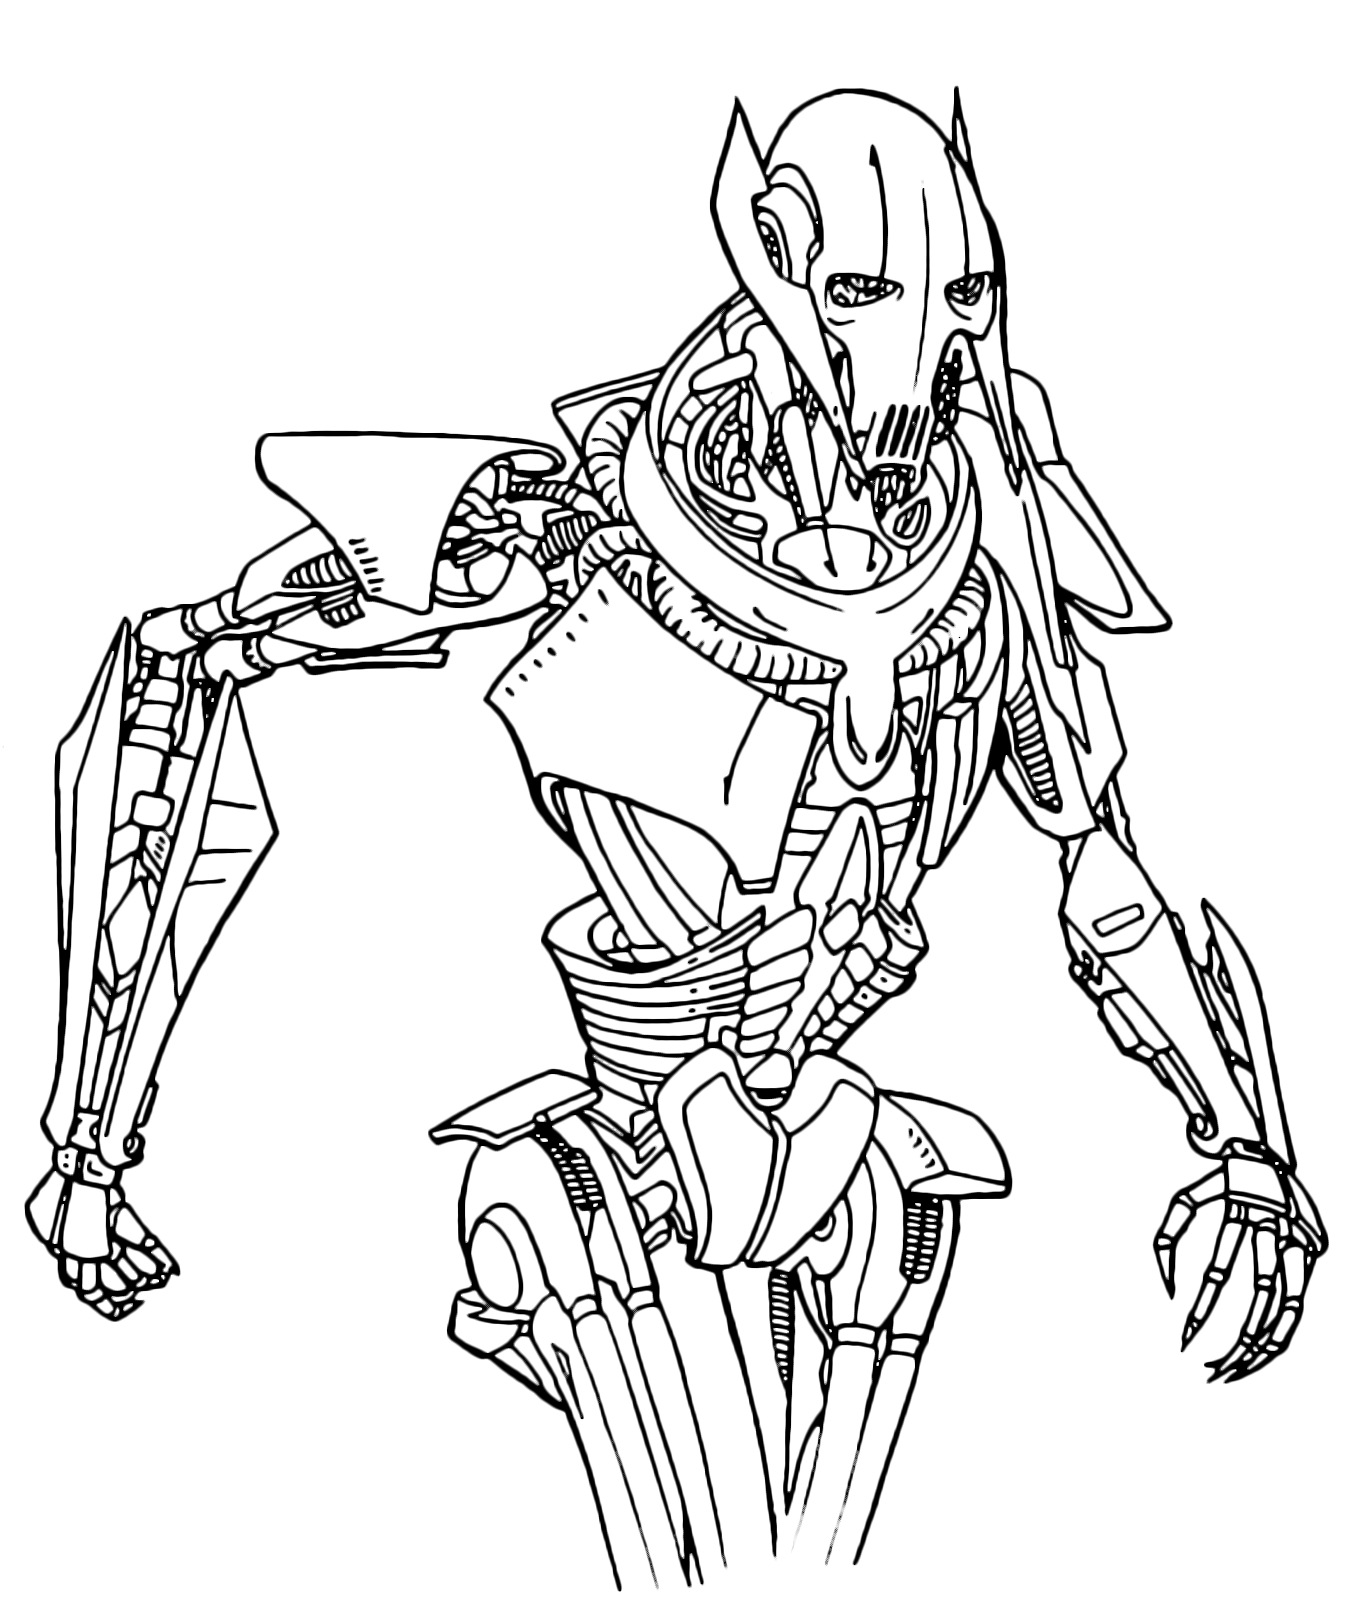 star wars coloring pages grievous